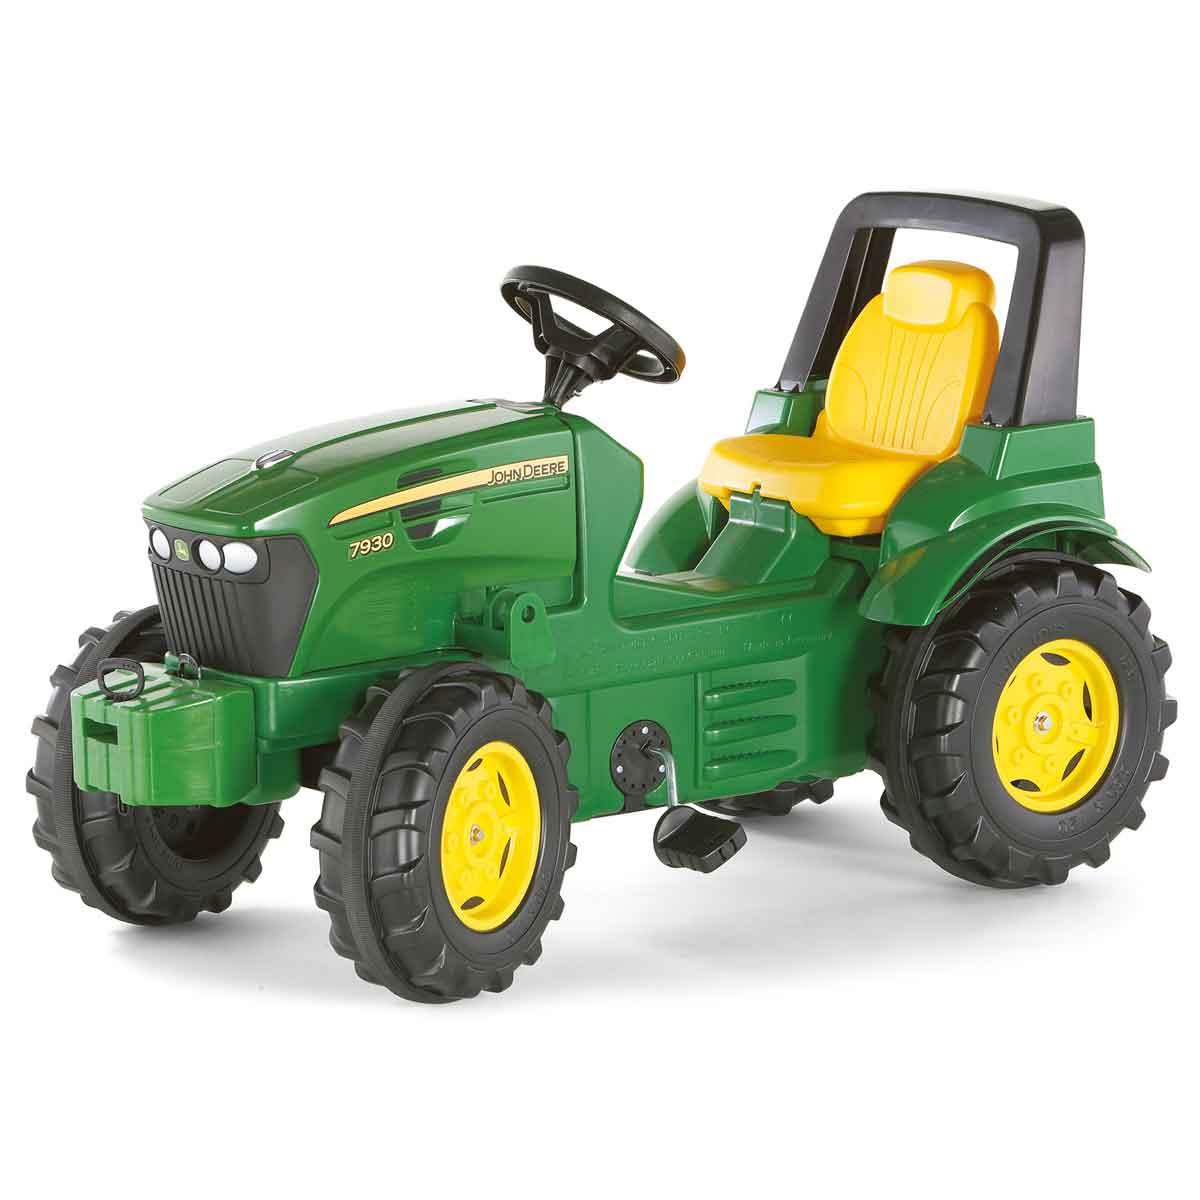 Rolly Toys Ride On John Deere 7930 Tractor, Green